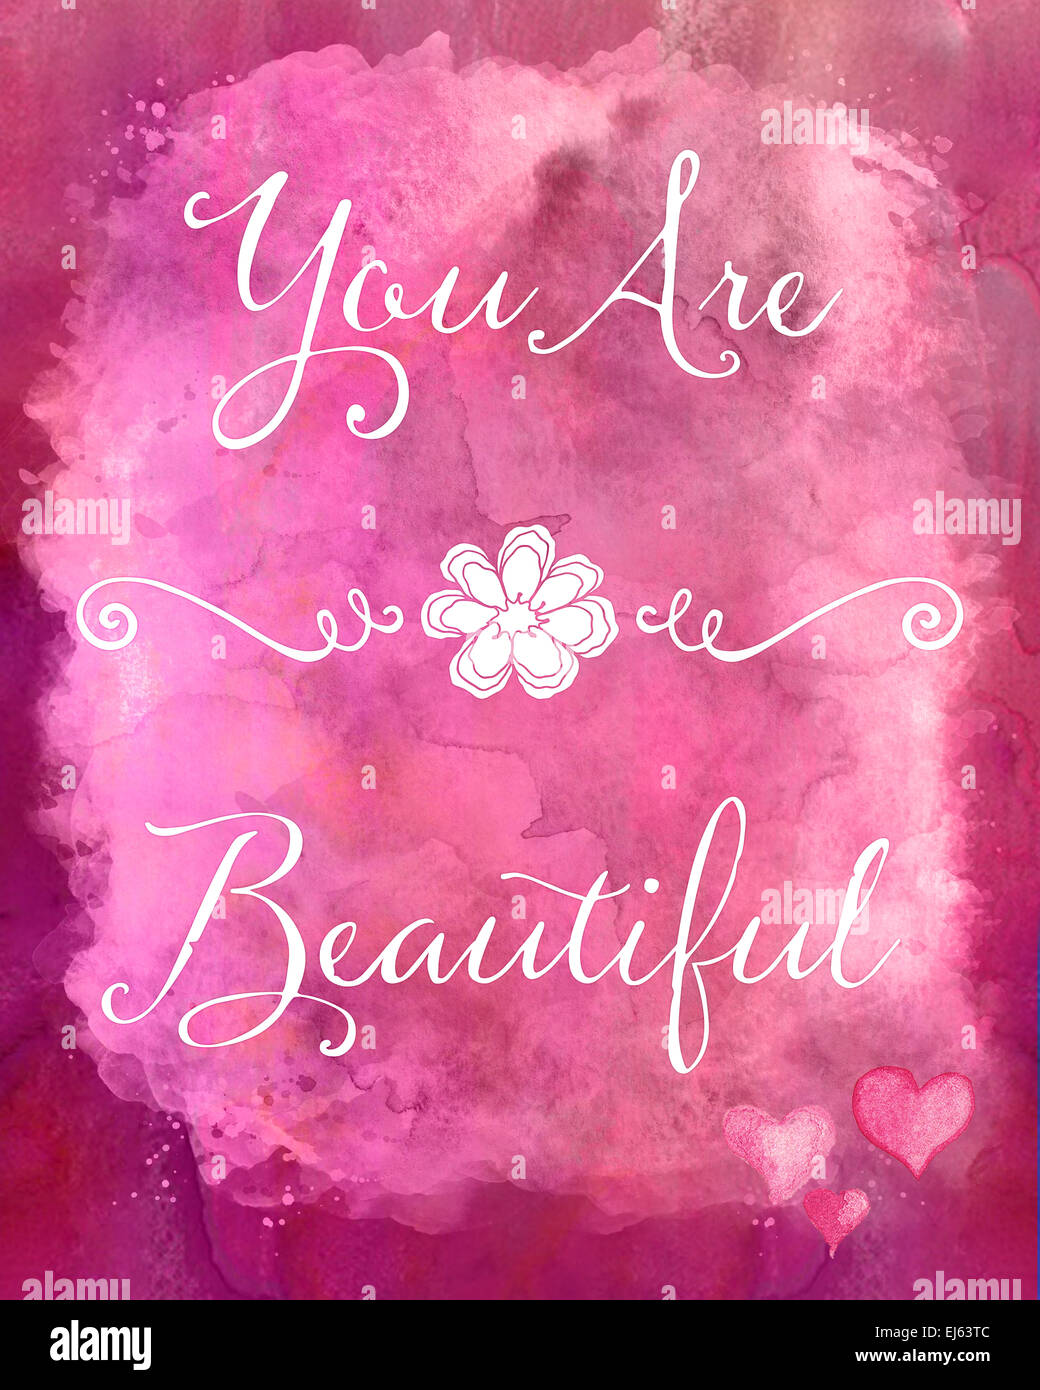 You are Beautiful Pink Watercolor Quote Motivational Inspirational Quotes Stock Photo